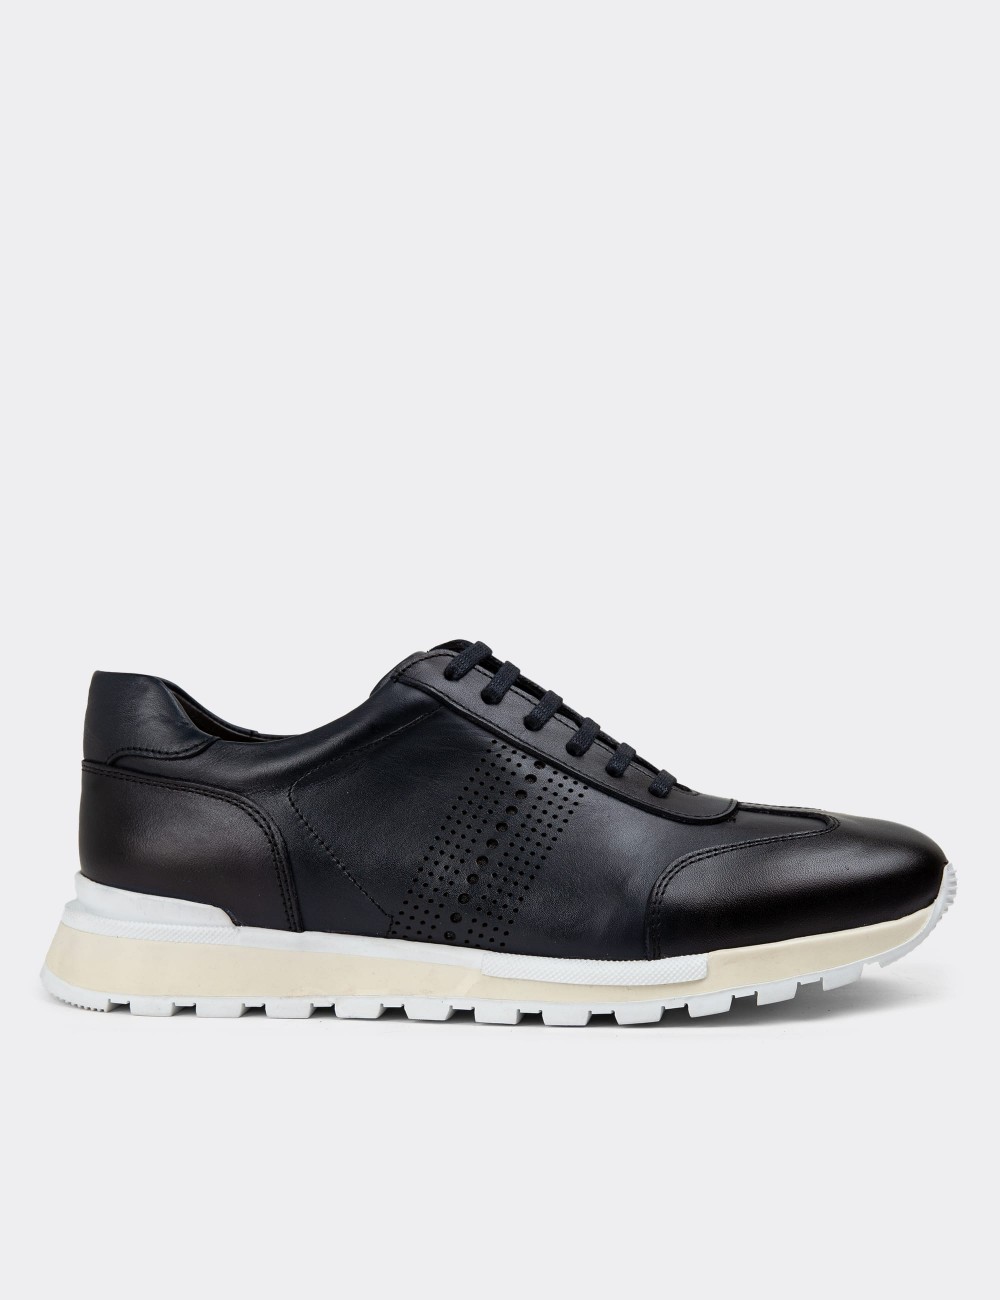 Navy Leather Sneakers - 01738MLCVT03